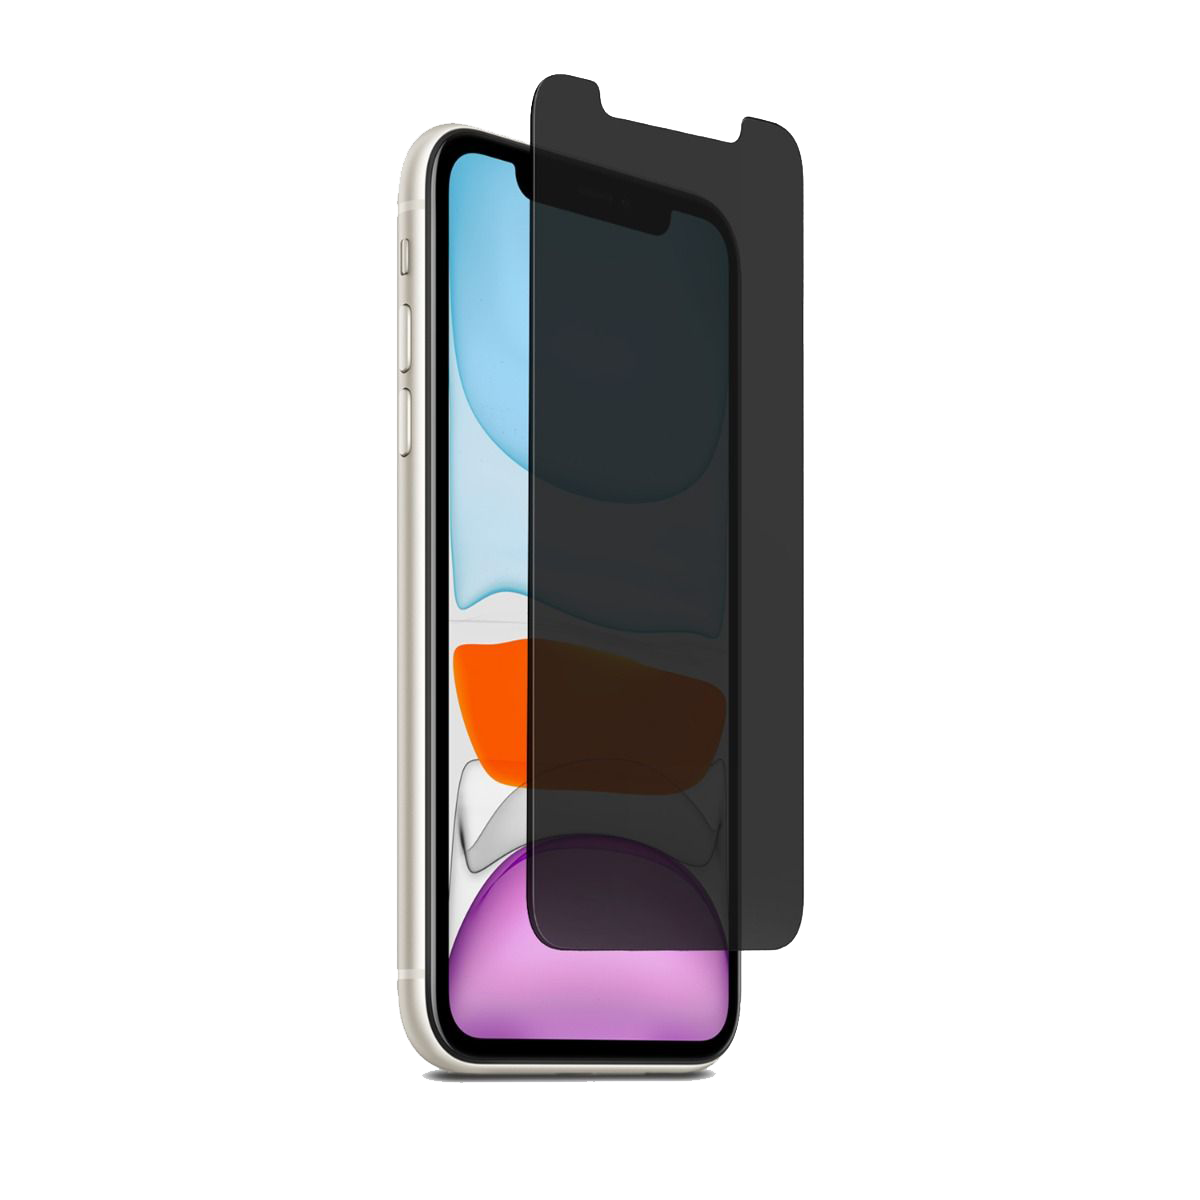 PROTECTIVE PRIVACY GLASS iPHONE 11